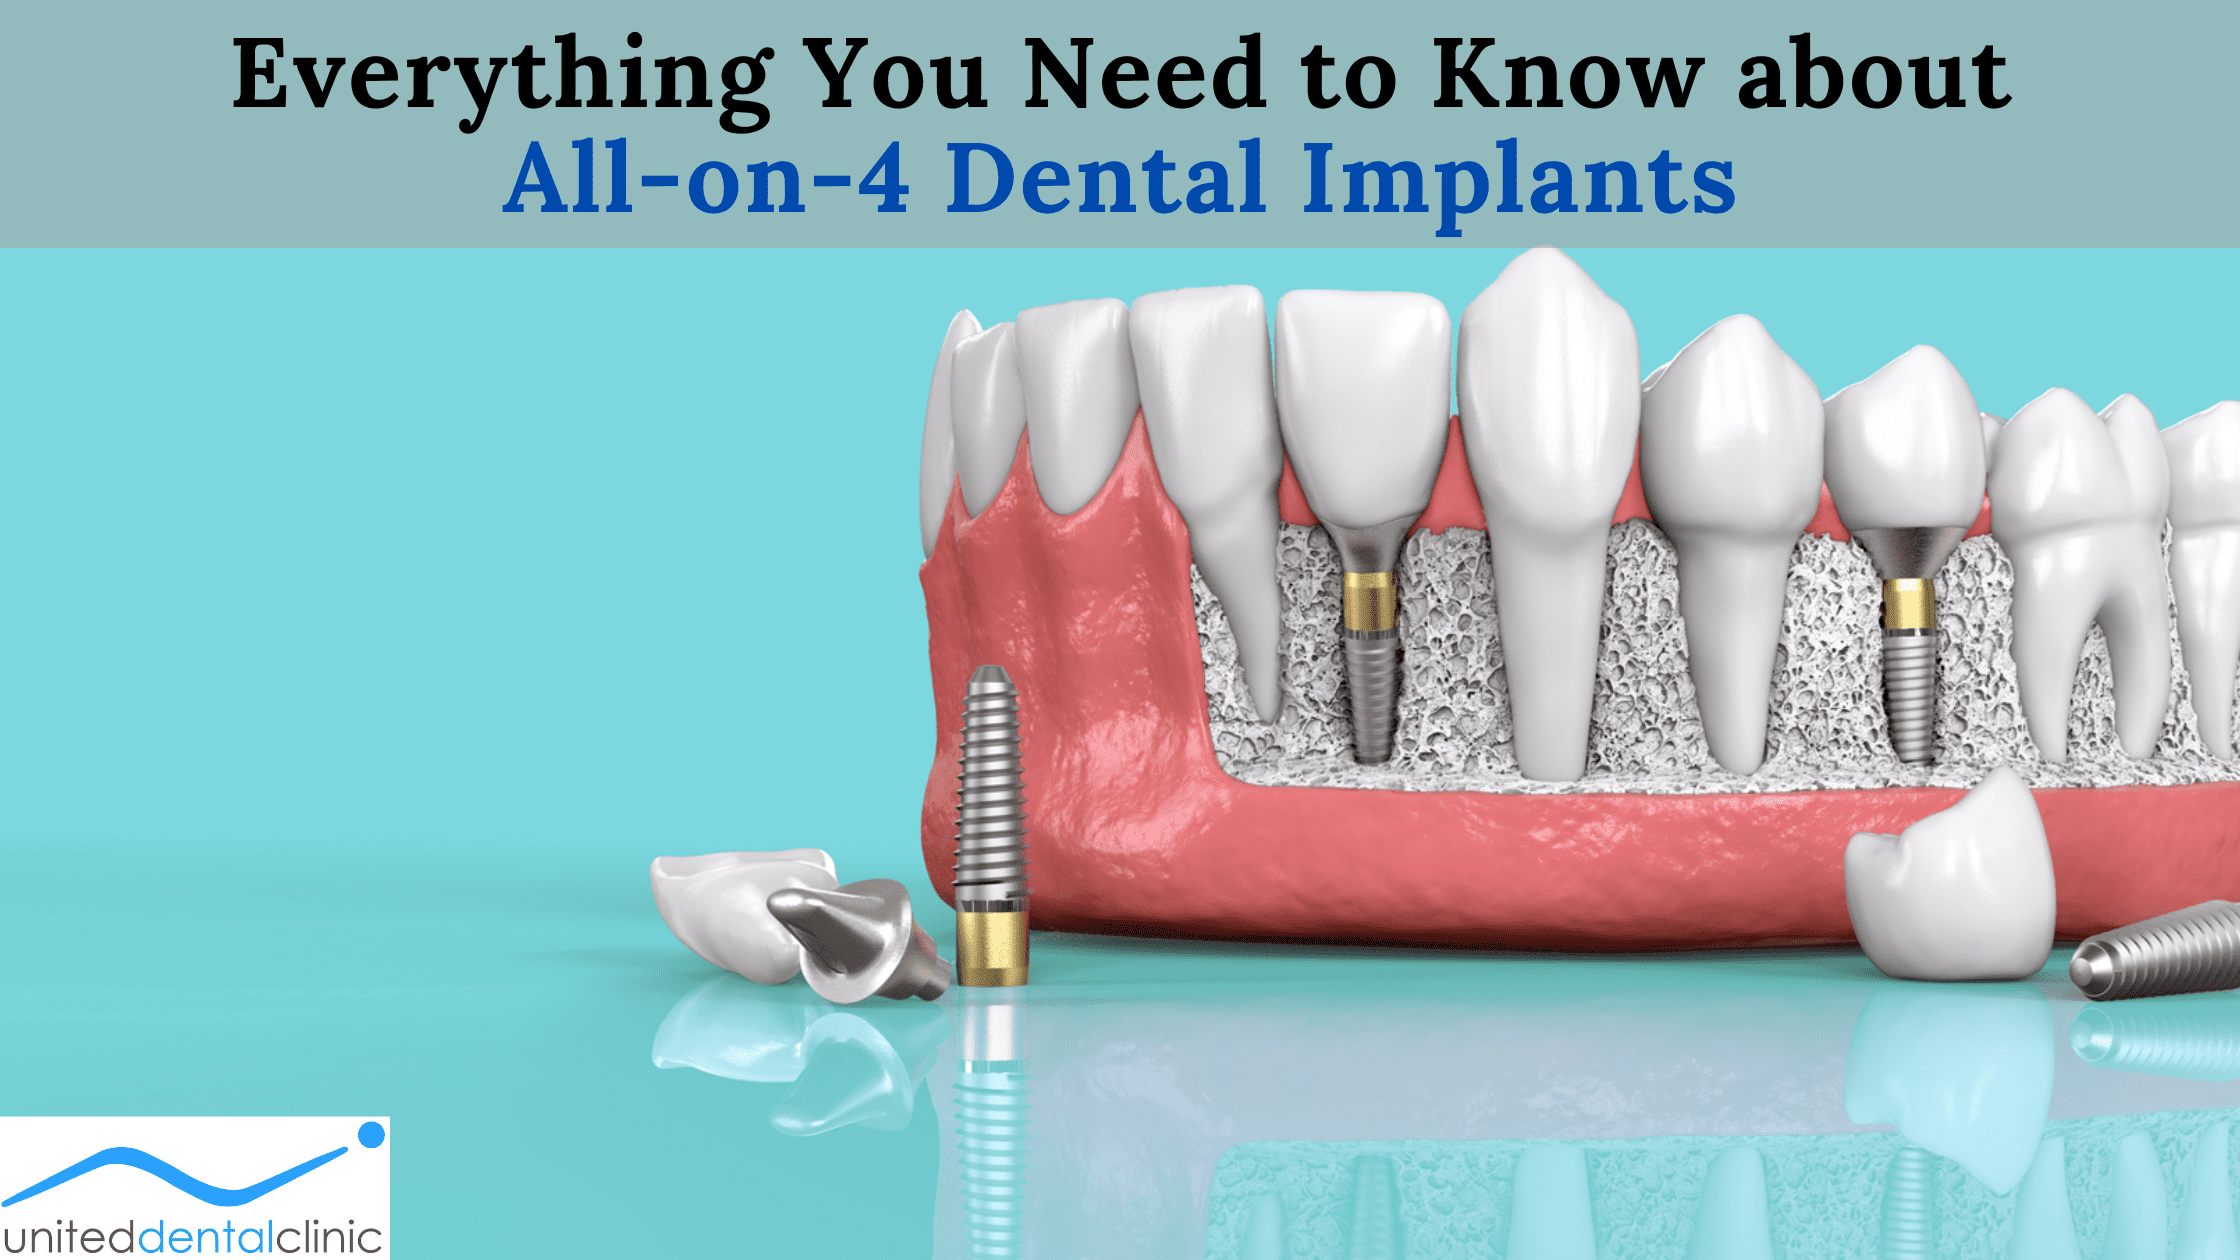 Everything You Need to Know about All-on-4 Dental Implants